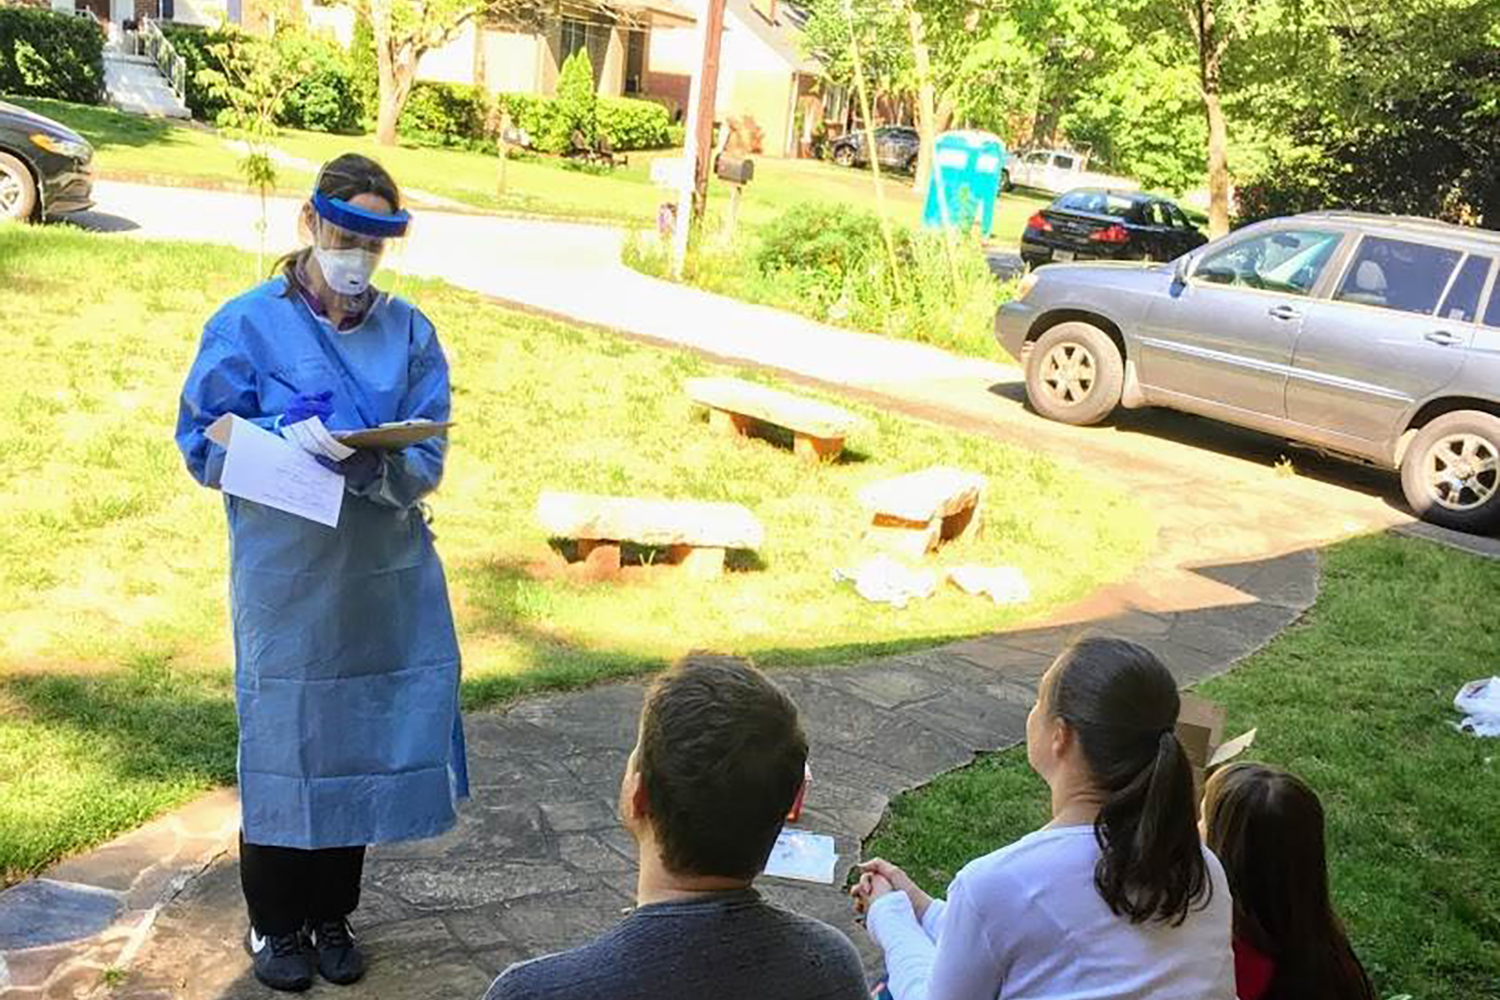 Woman dressed in personal protective equipment stands on sidewalk to ask questions to three people on their front porch.